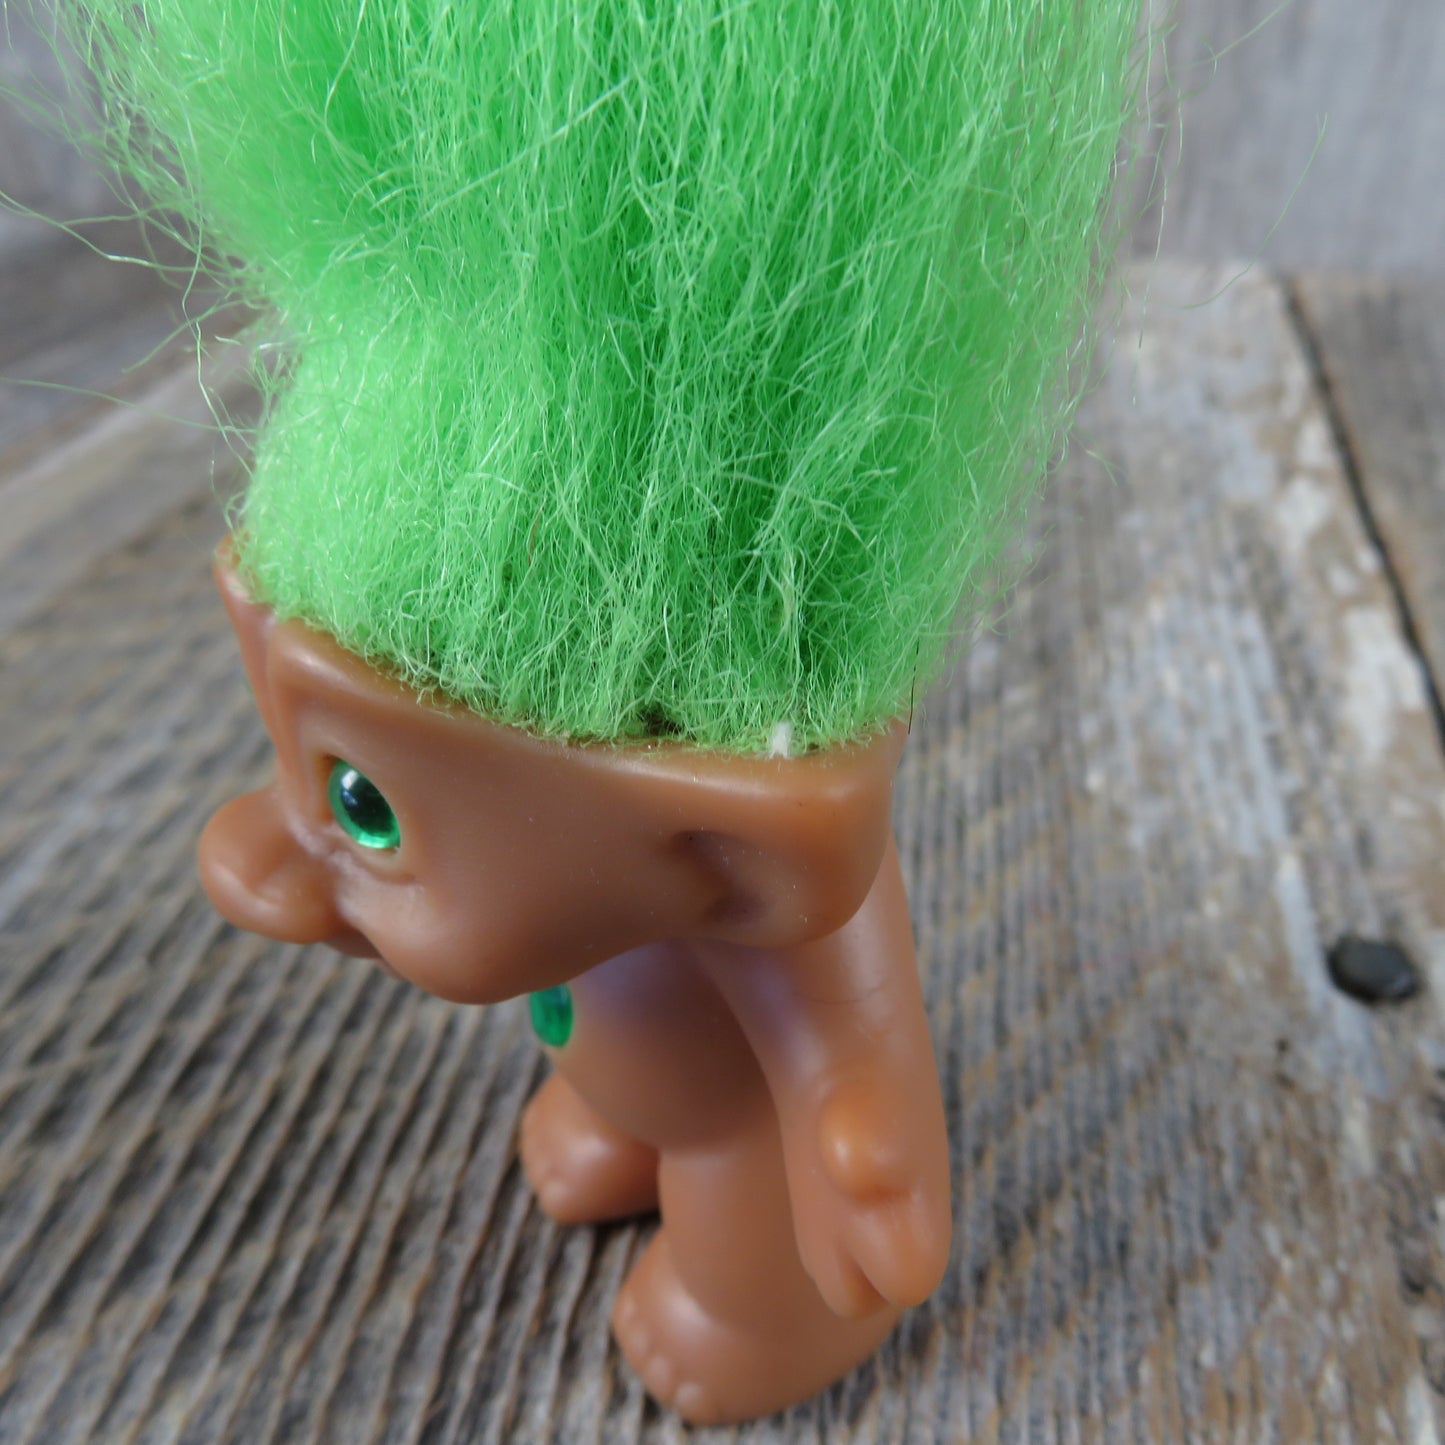 Vintage Troll Doll Green Heart Jewel Belly Button Ace Novelty Lime Green - At Grandma's Table